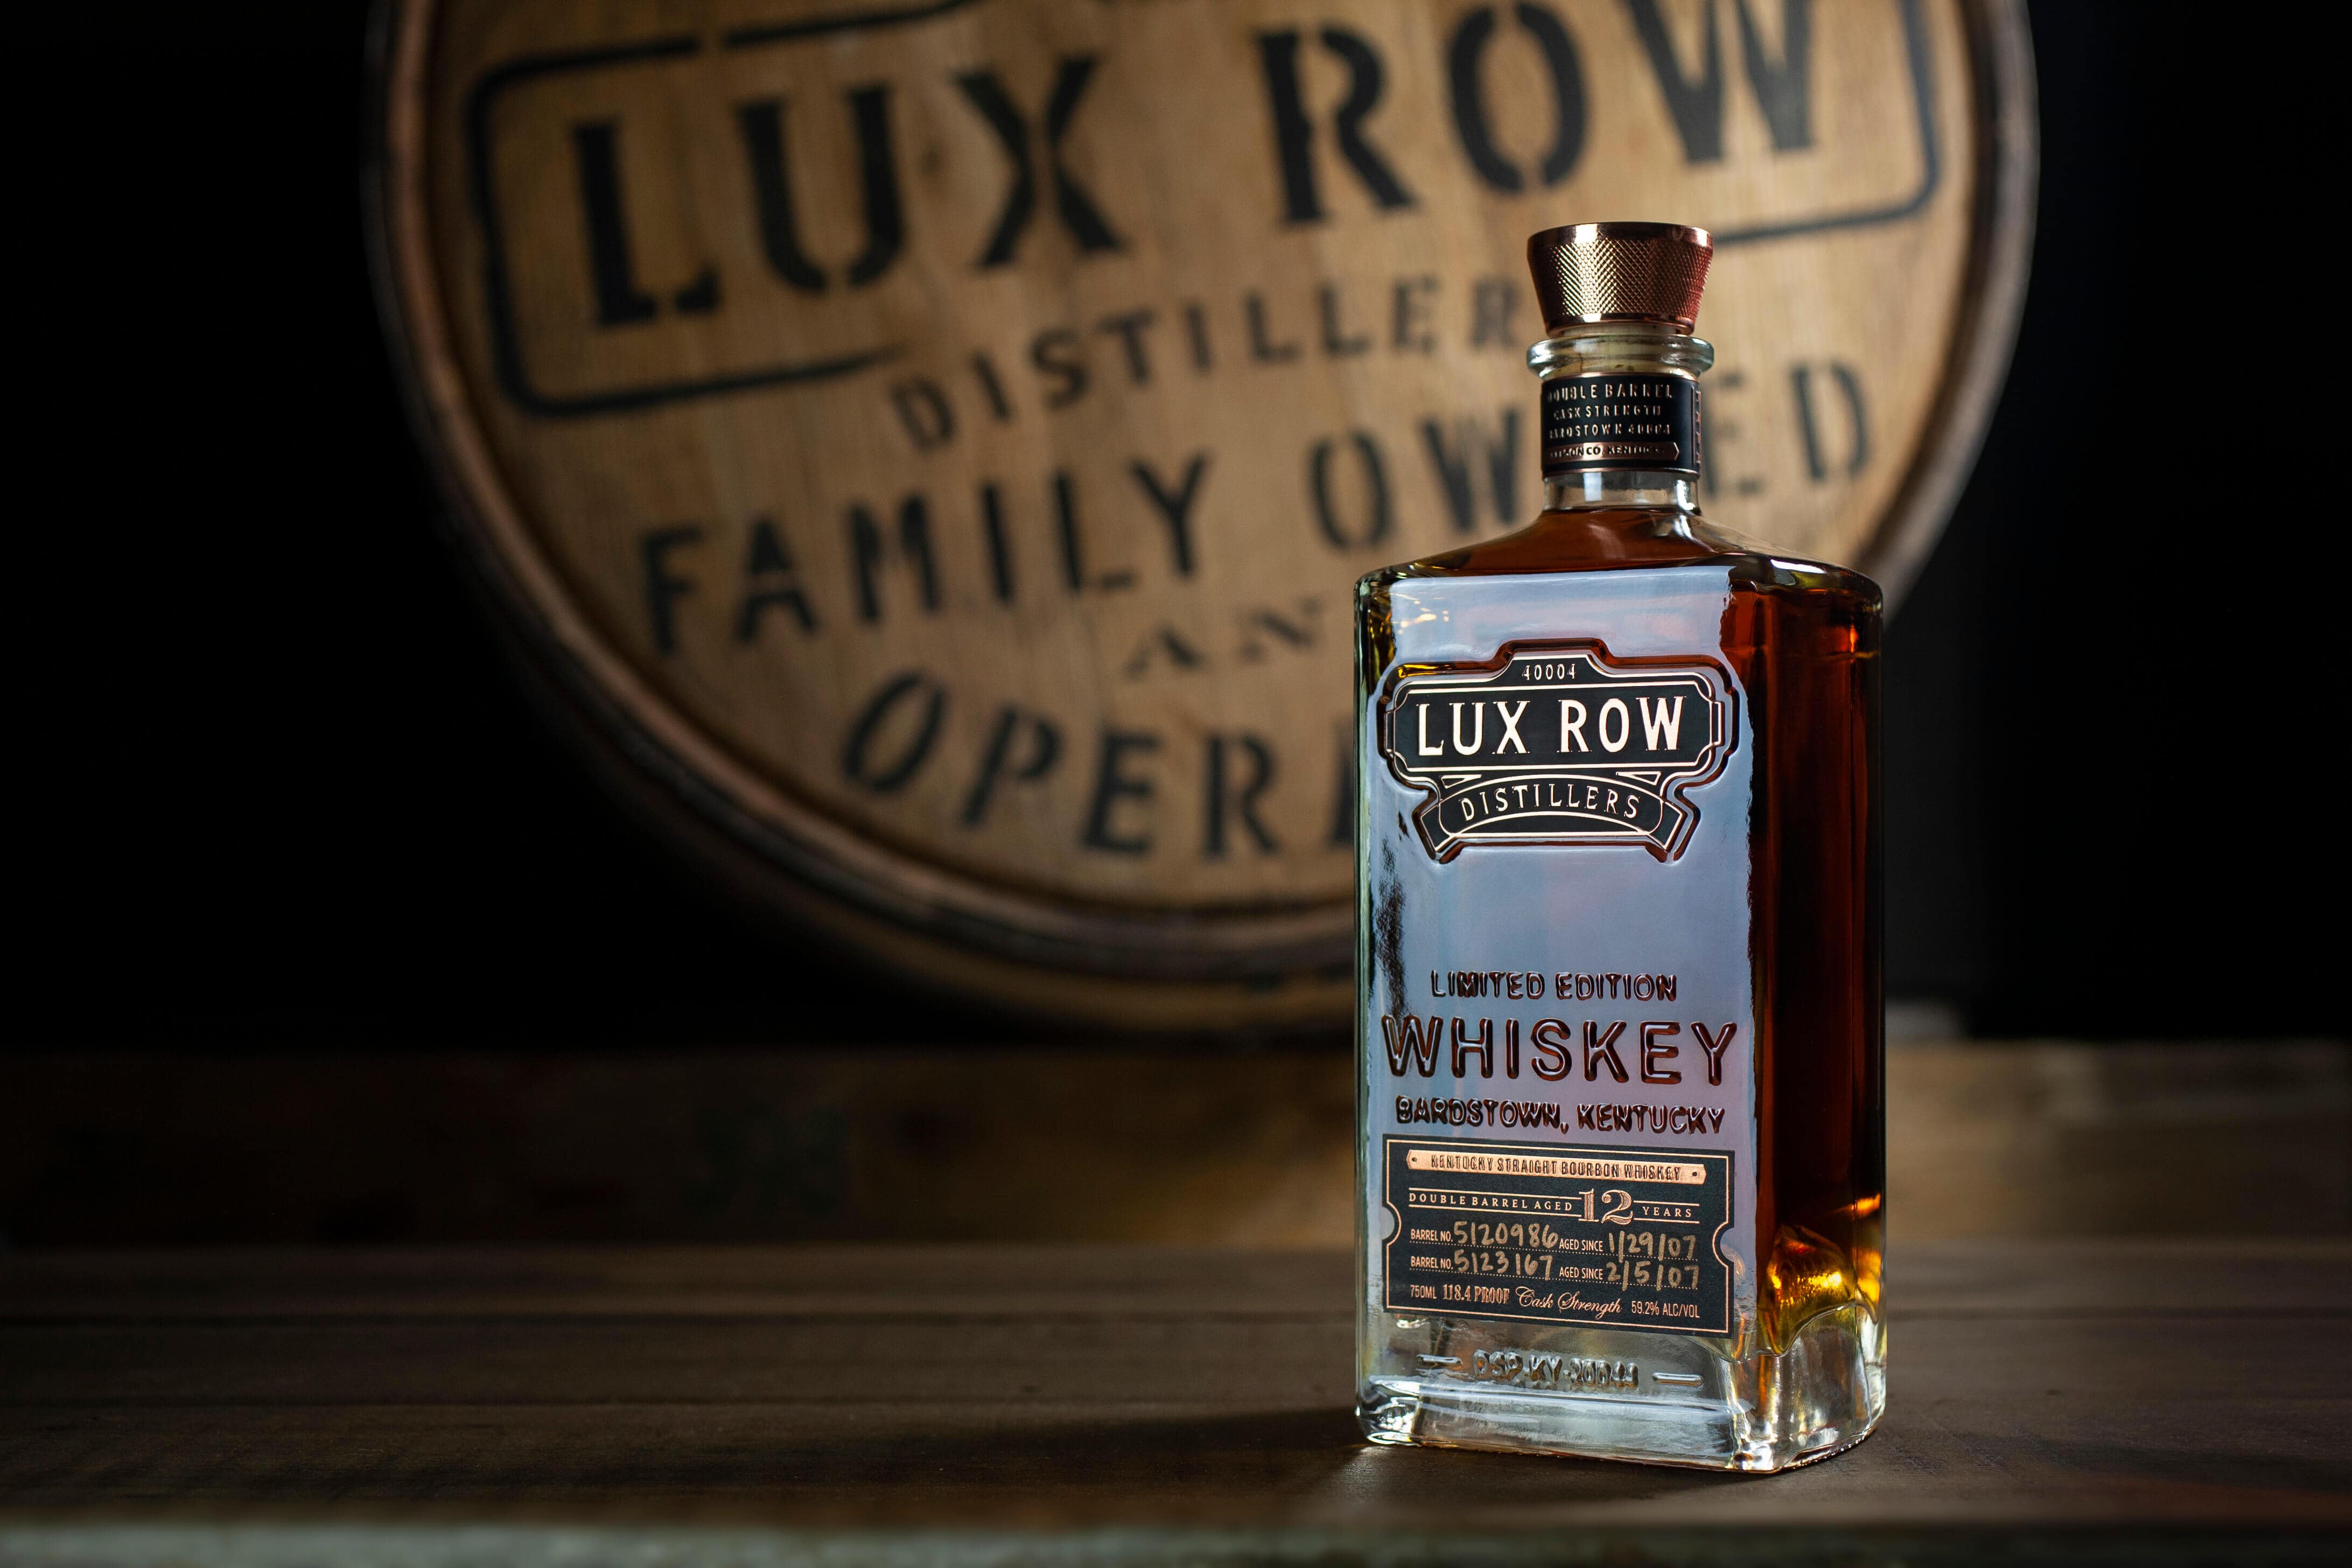 LRD Bourbon - Lux Row Distillers Launches New Bourbon to Commemorate First Anniversary of Distillery’s Opening